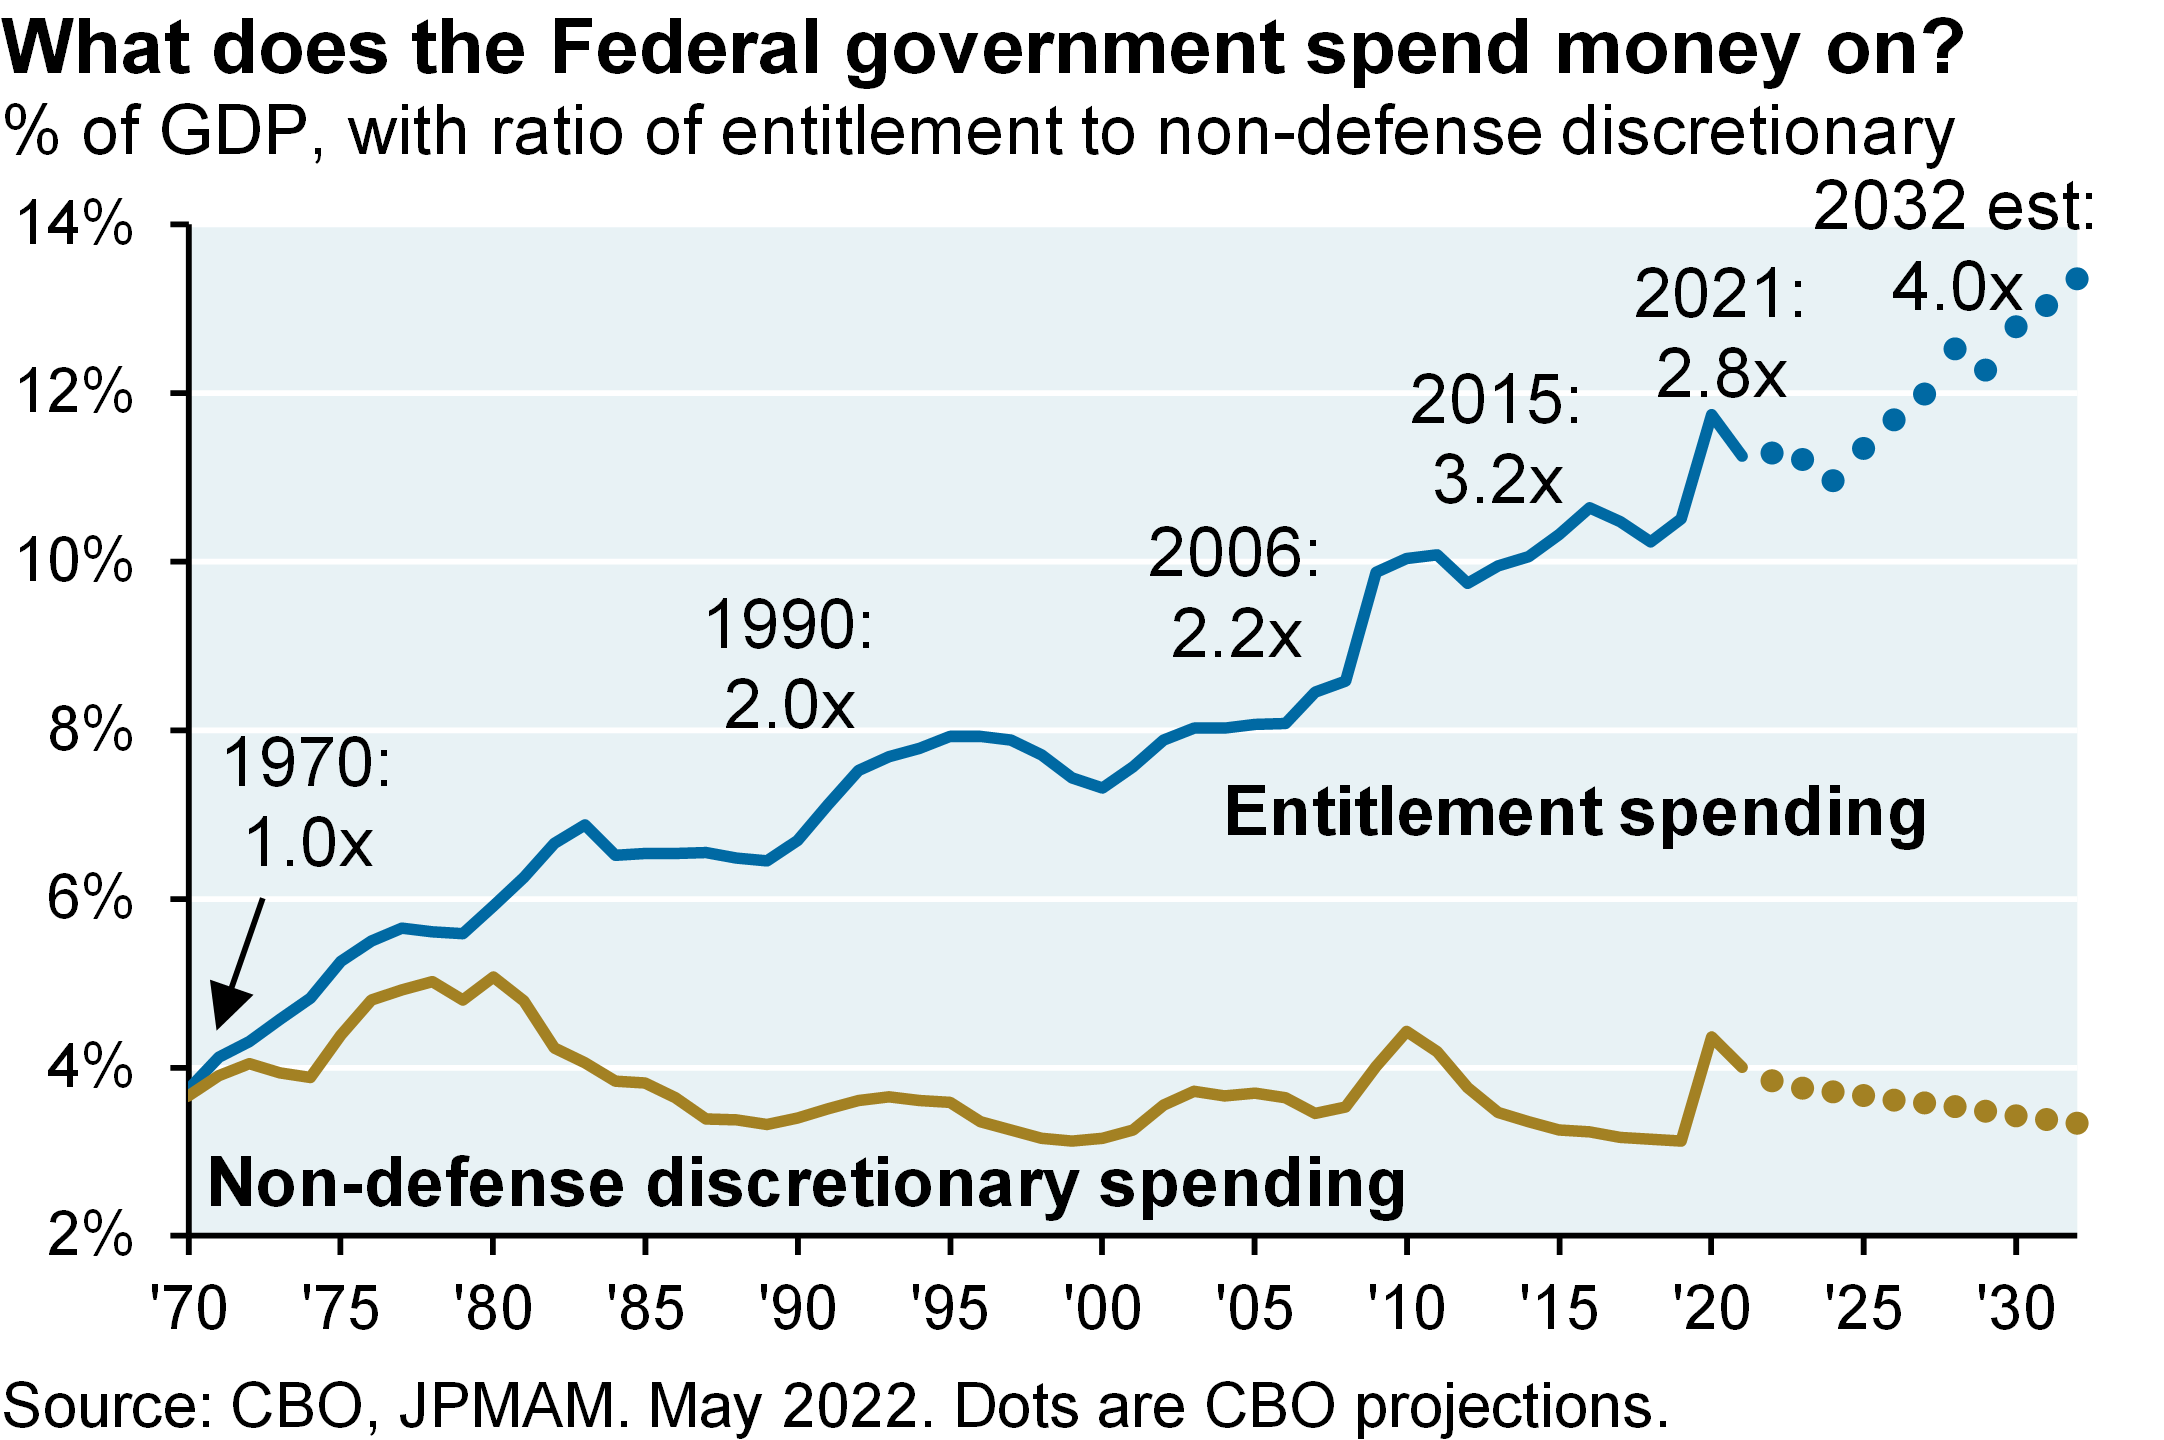 Line chart shows Federal government entitlement spending vs non-defense discretionary spending. The balance between entitlement spending and non-defense discretionary spending started out at 1.0x when Medicare and Medicaid systems were created in the late 1960’s1F2. That ratio is now almost 3.0x and will rise to 4.0x in a few years. By 2032, entitlement payments plus interest are expected to consume all Federal revenue collection on a permanent basis, with little left for discretionary spending (see Appendix).